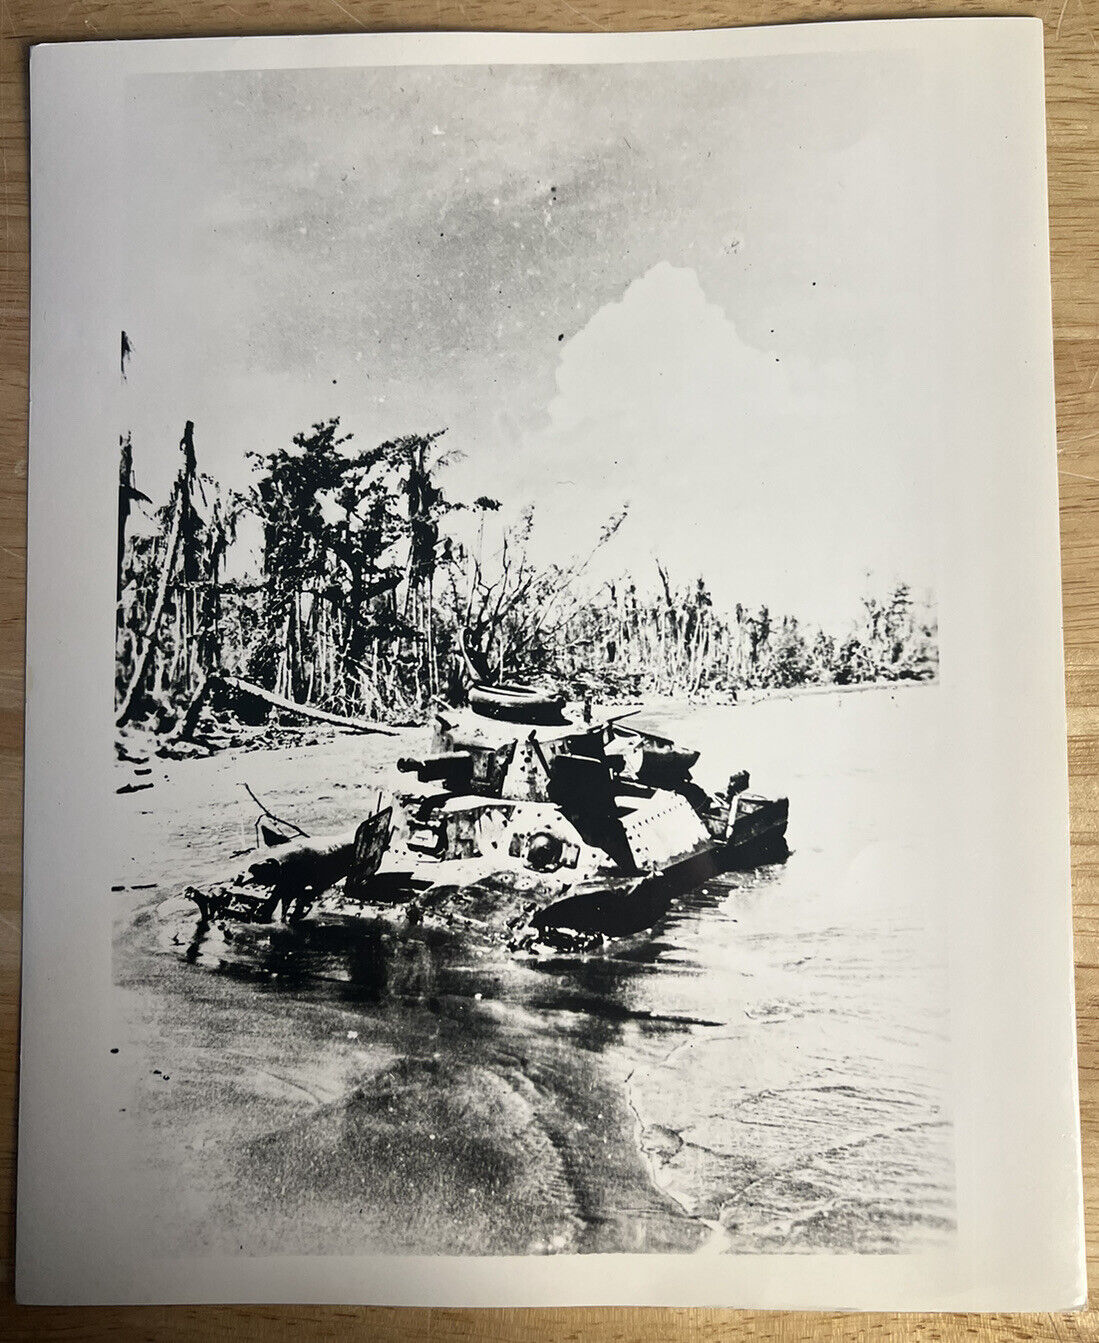 ANTIQUE WWII ORIGINAL PHOTOGRAPH OF A SHERMAN TANK SINKING IN WATER DURING WWII